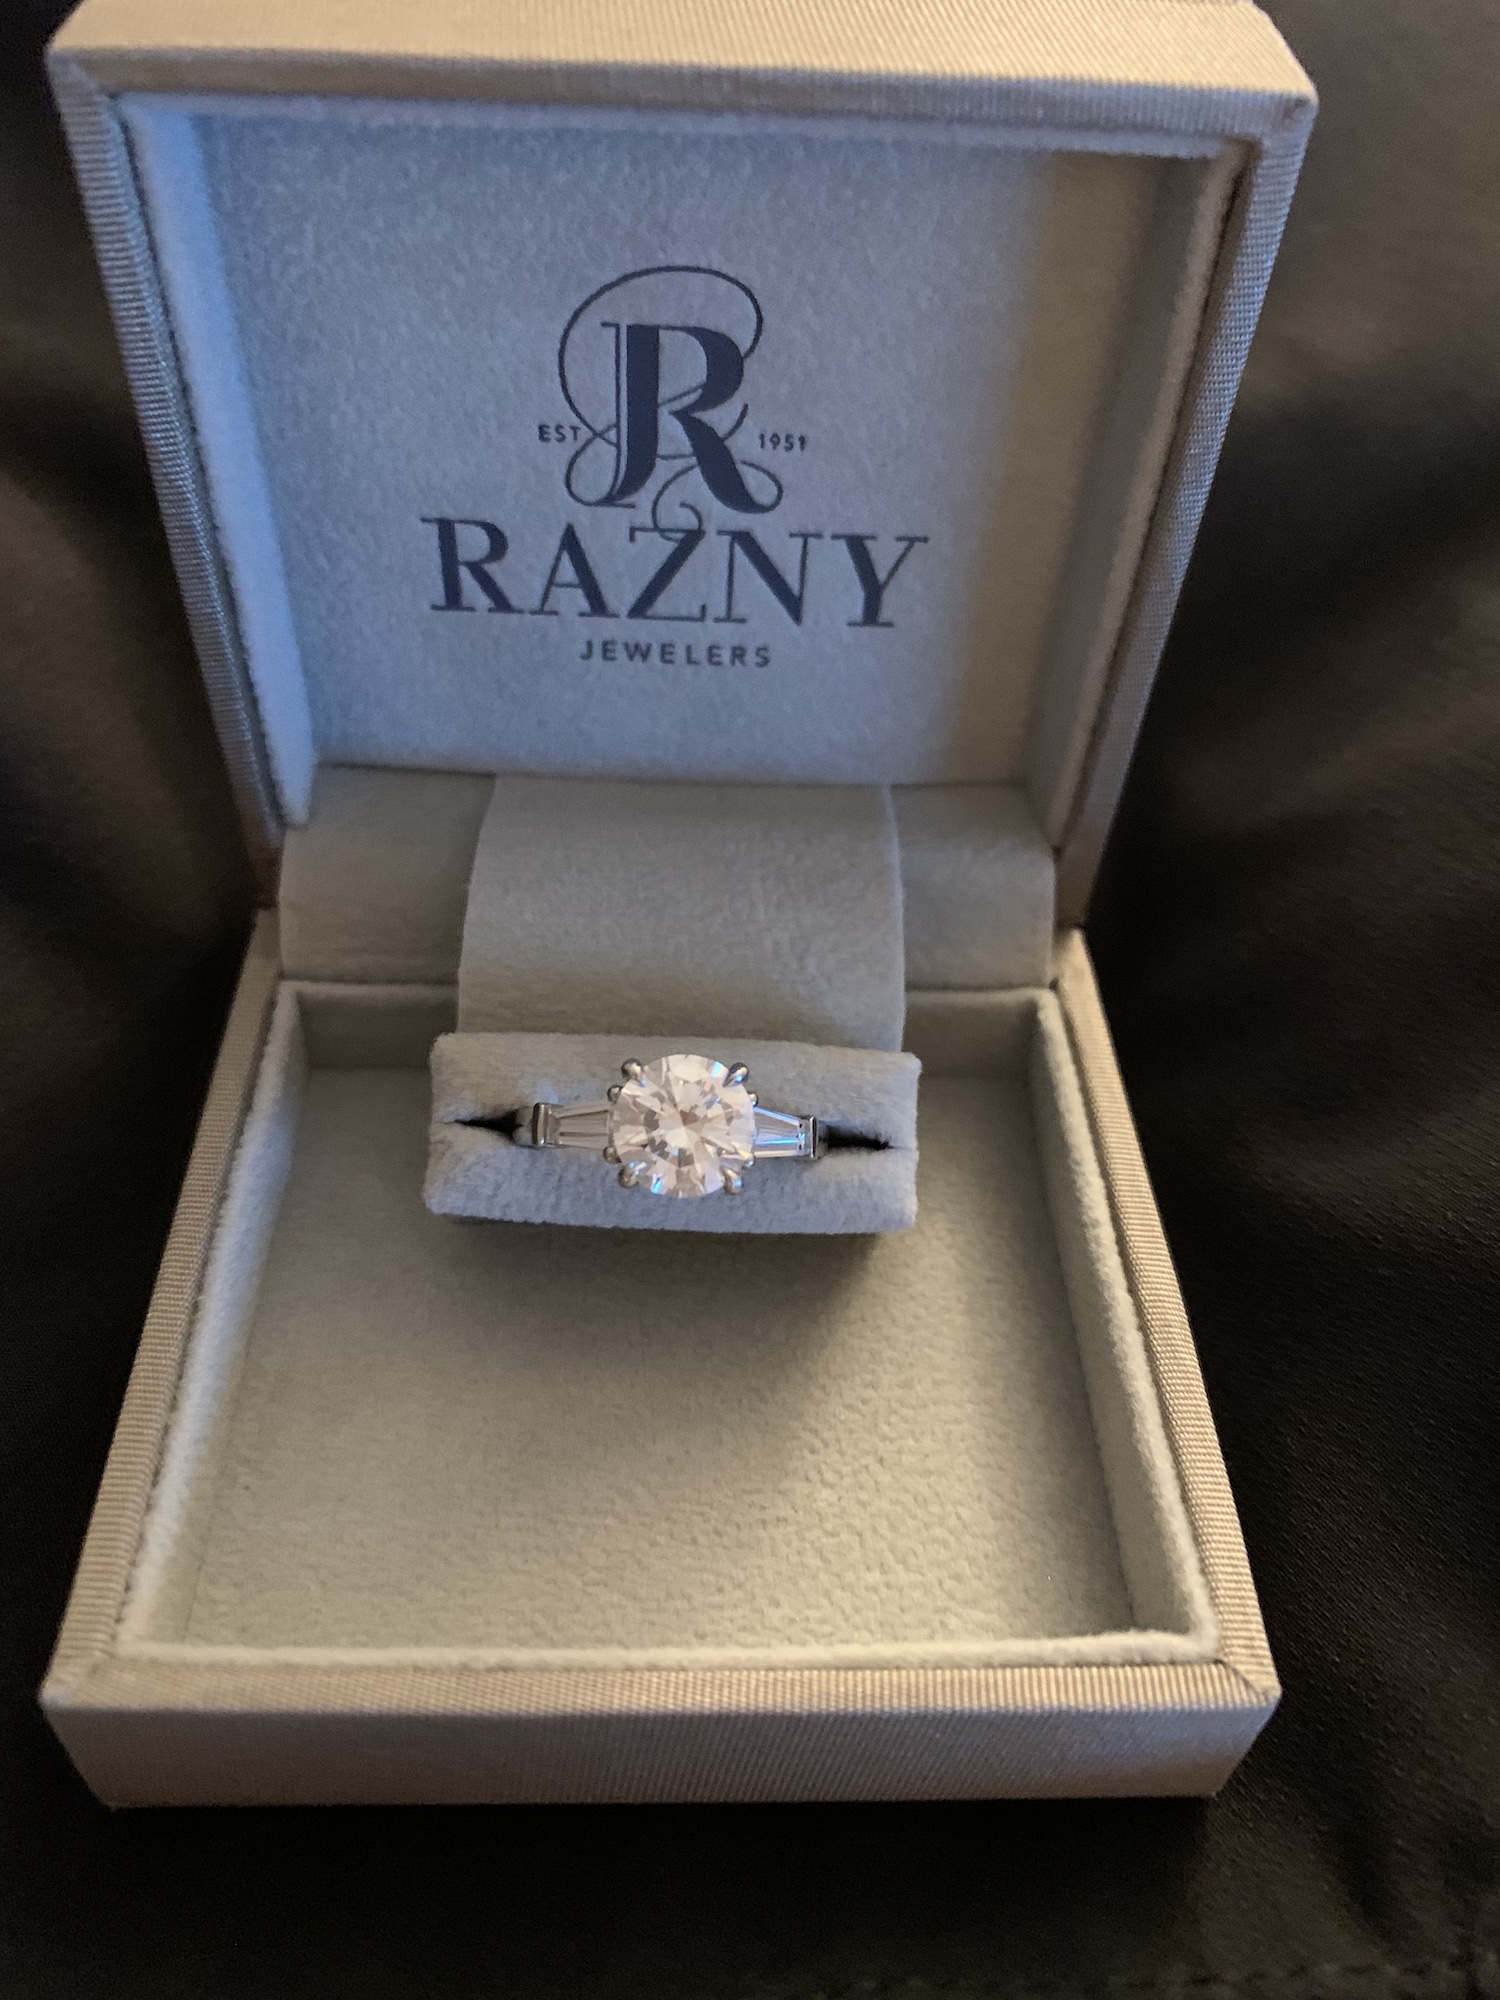 A box with a logo of a razny on it and a ring